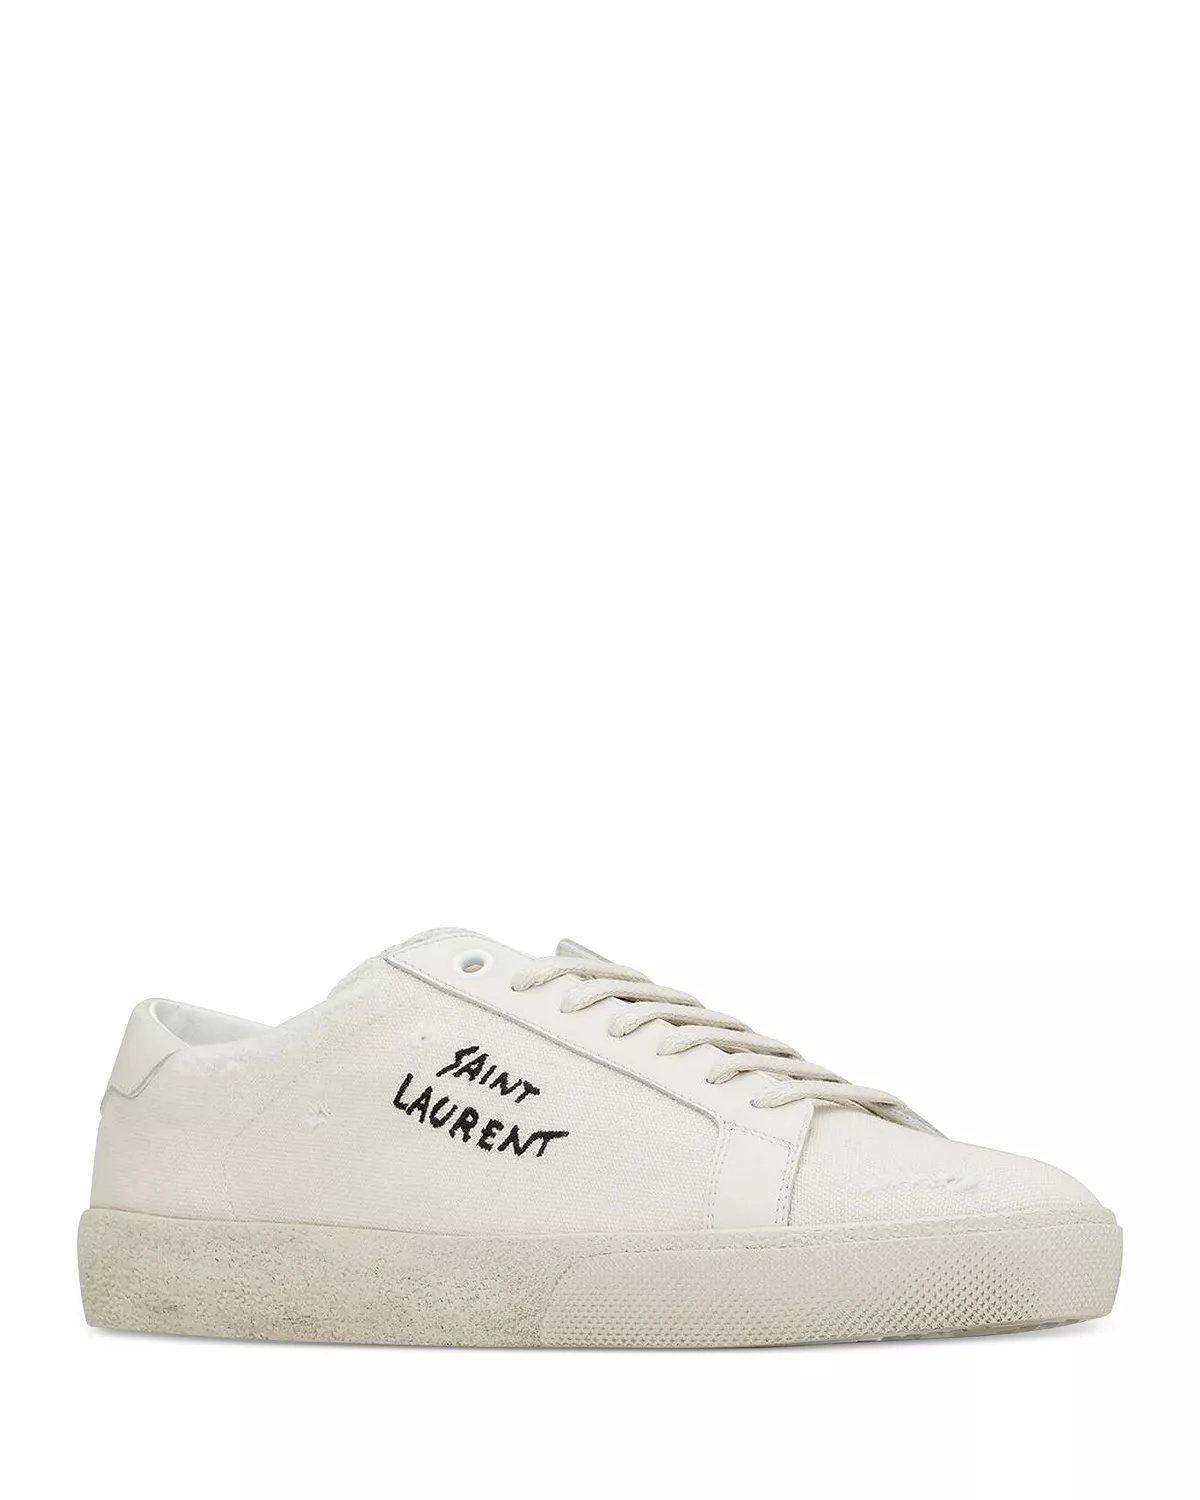 Court Classic Sl/06 Embroidered Sneakers in Canvas and Leather - 4